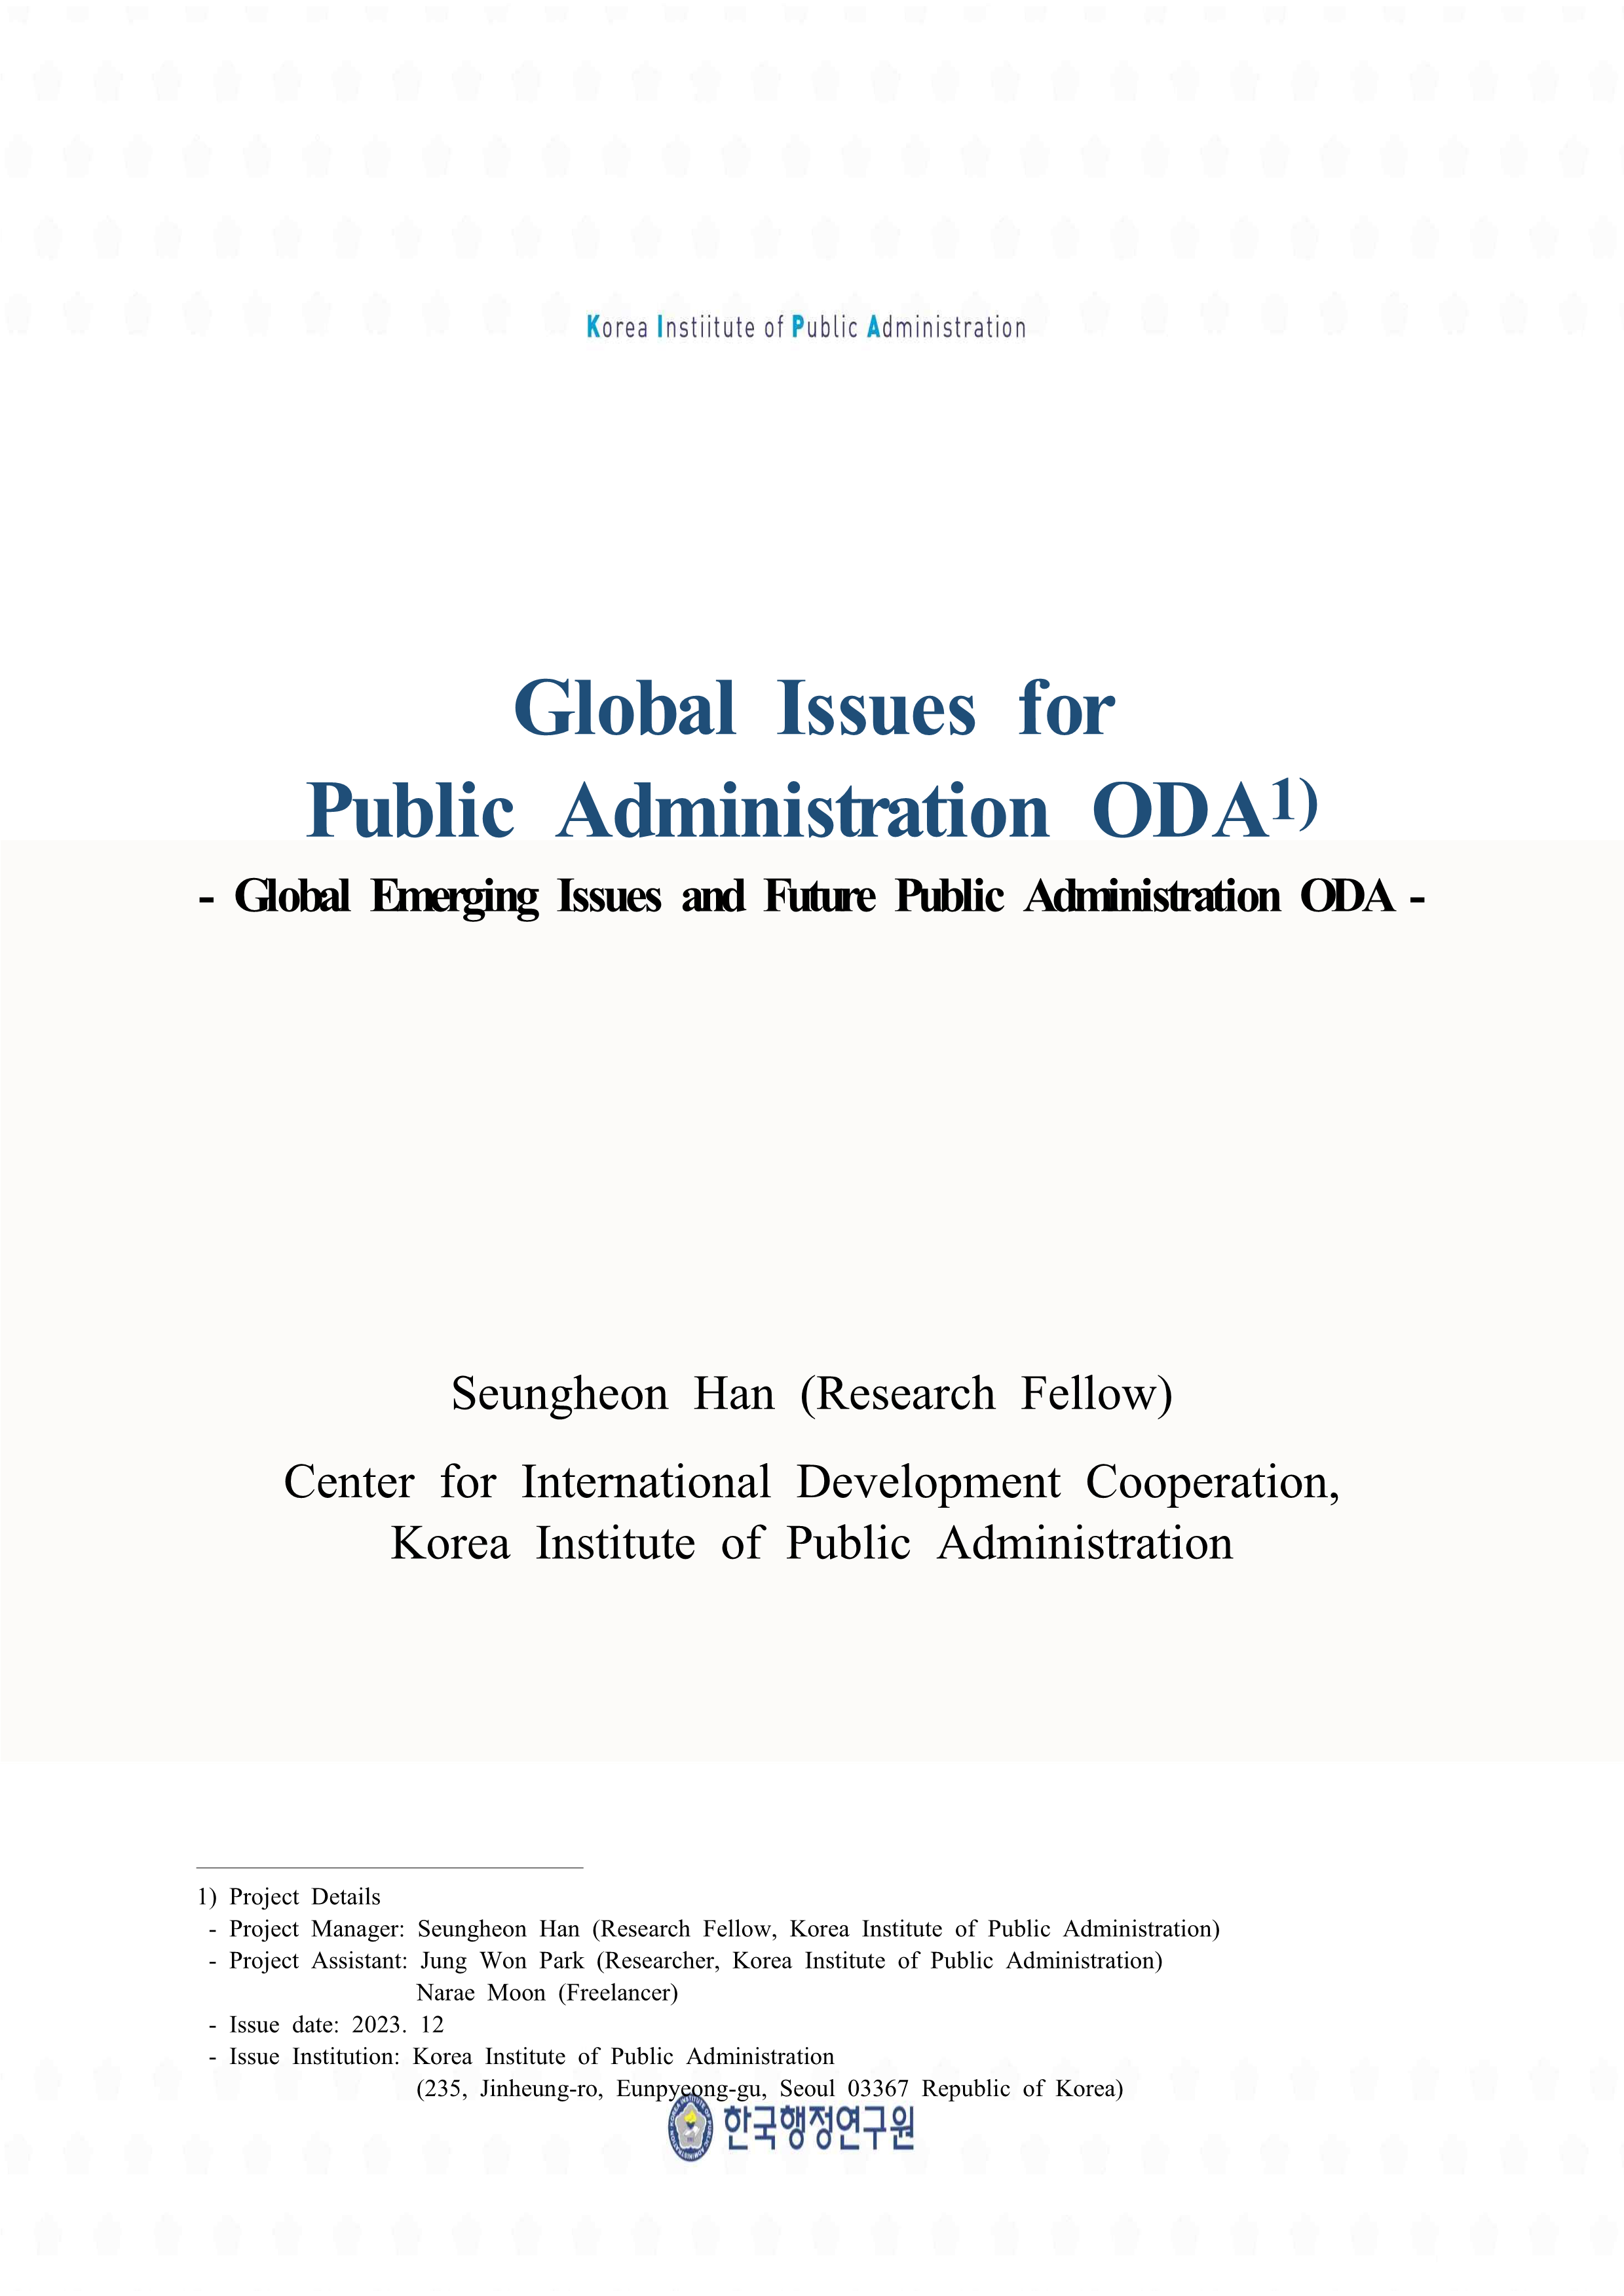 《Global Issues for Public Administration ODA_2》 Global Emerging Issues and Future Public Administration ODA